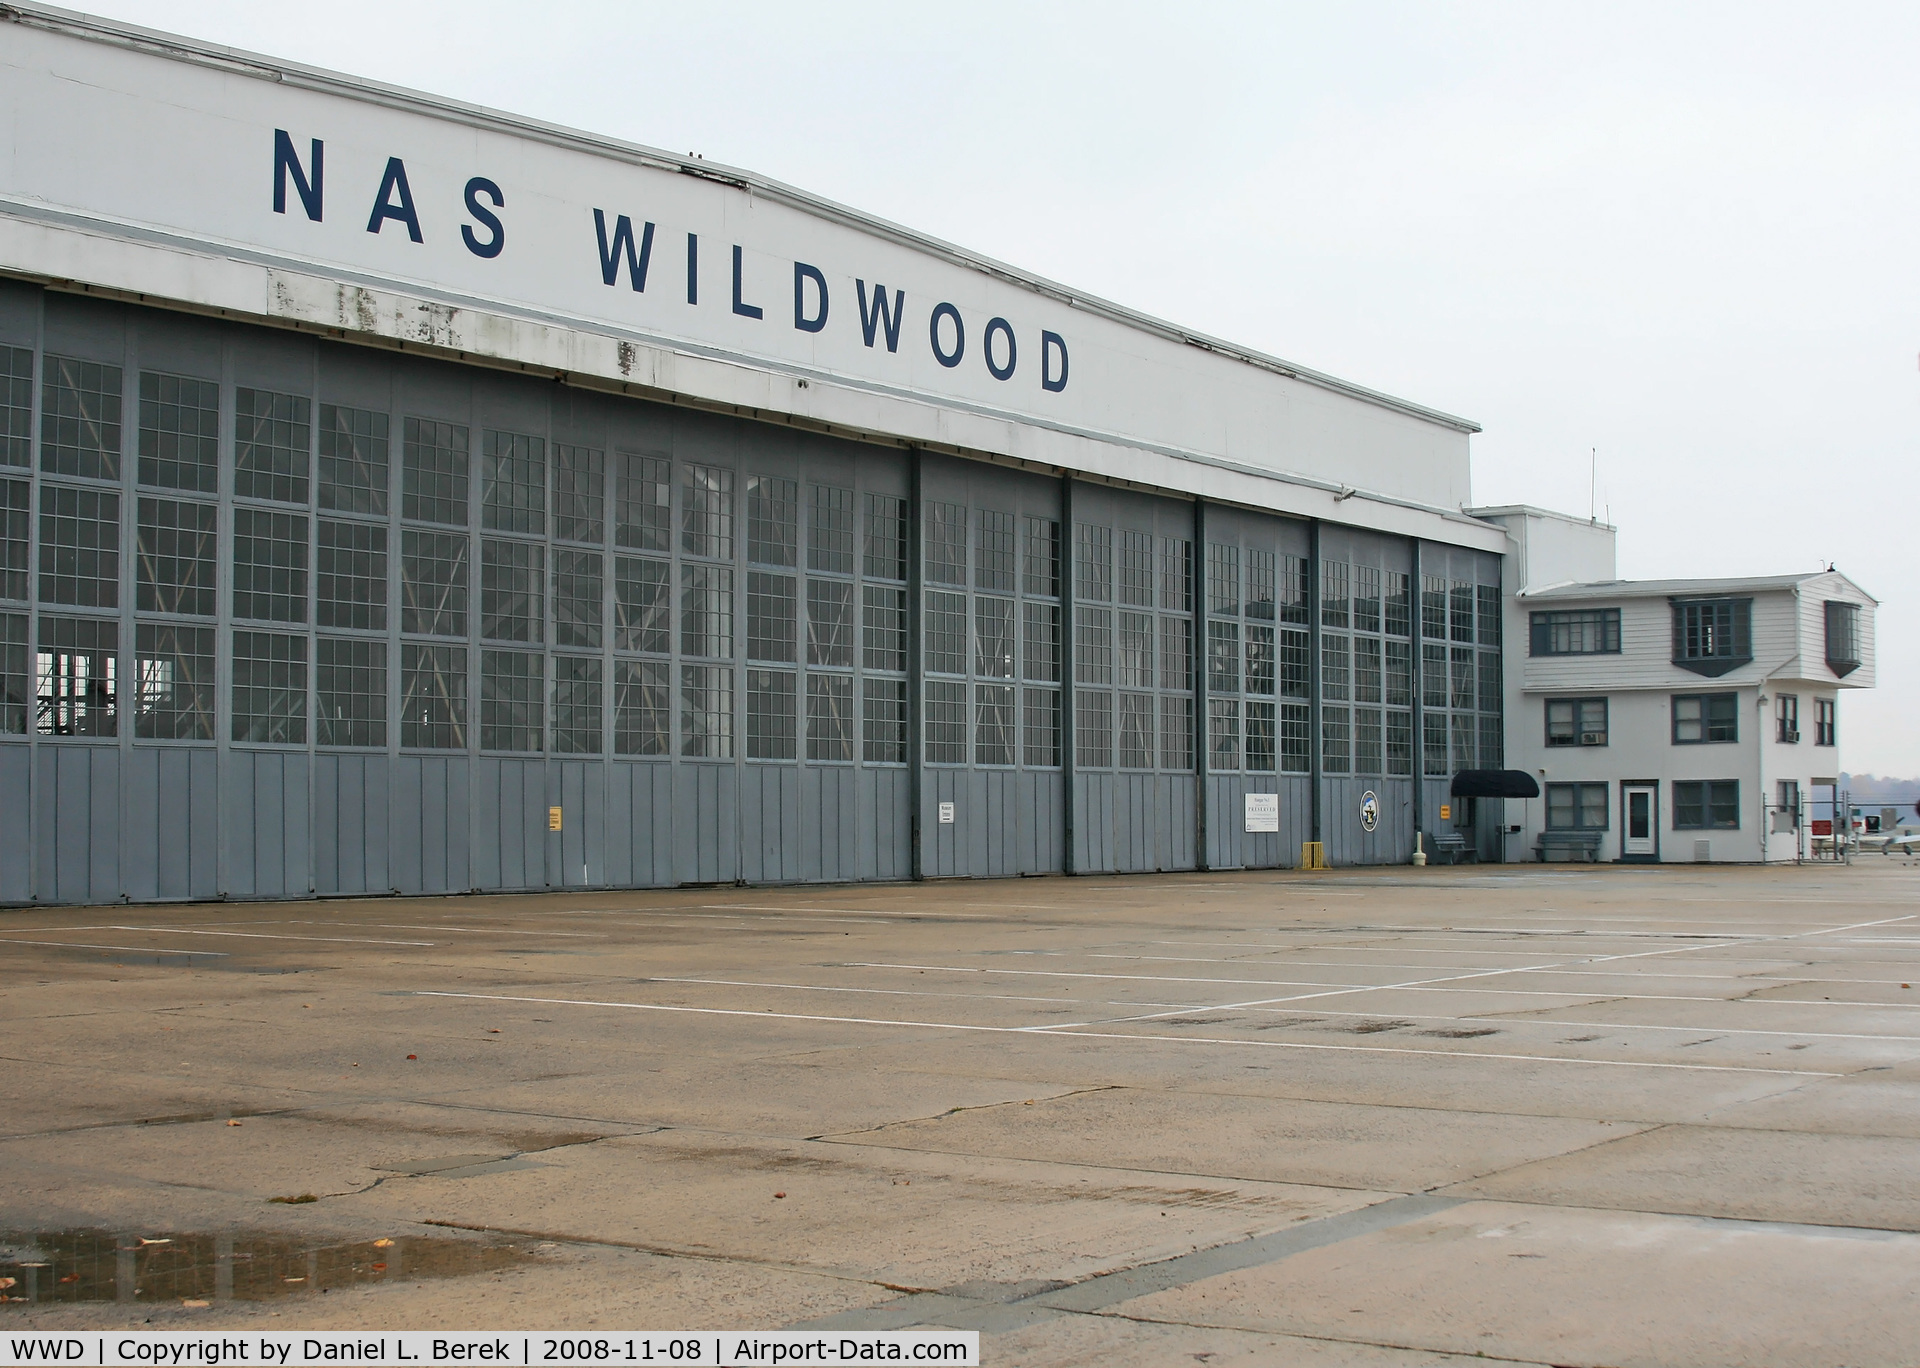 Cape May County Airport (WWD) - This is the historic hangar, which gave this airport its WWD moniker.  This building now houses the wonderful NAS Wildwood Foundation Museum.